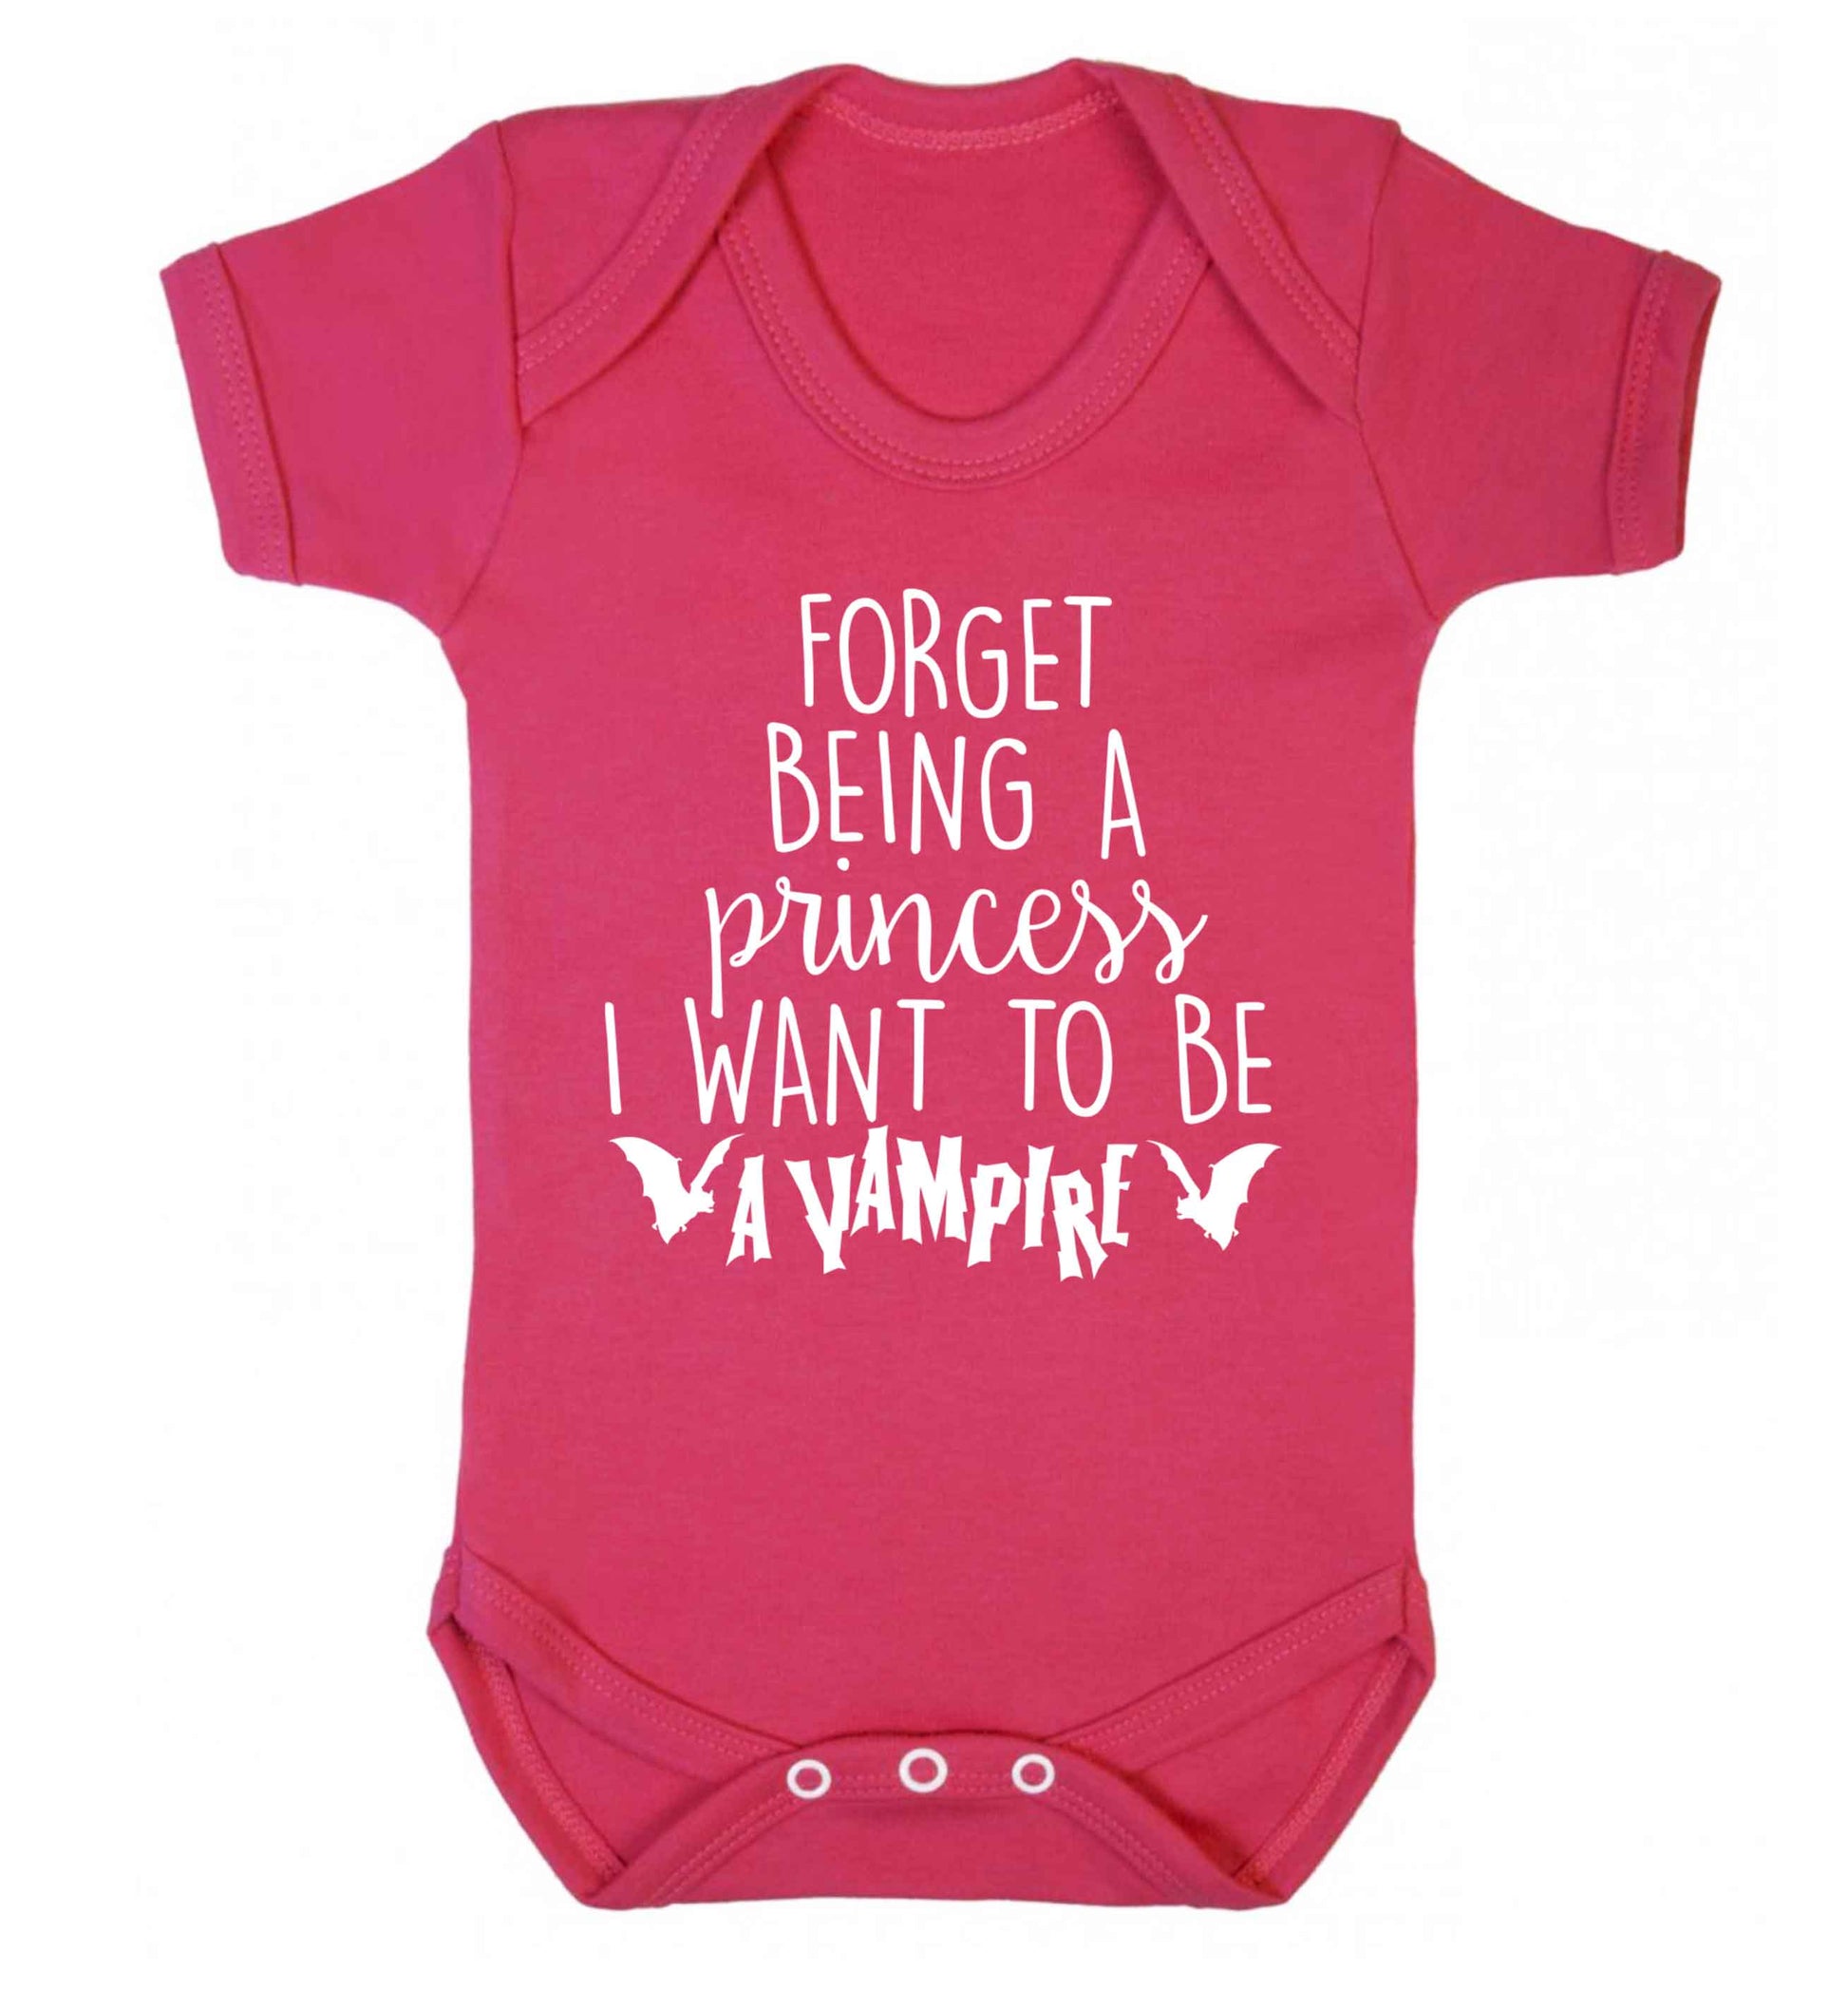 Forget being a princess I want to be a vampire Baby Vest dark pink 18-24 months